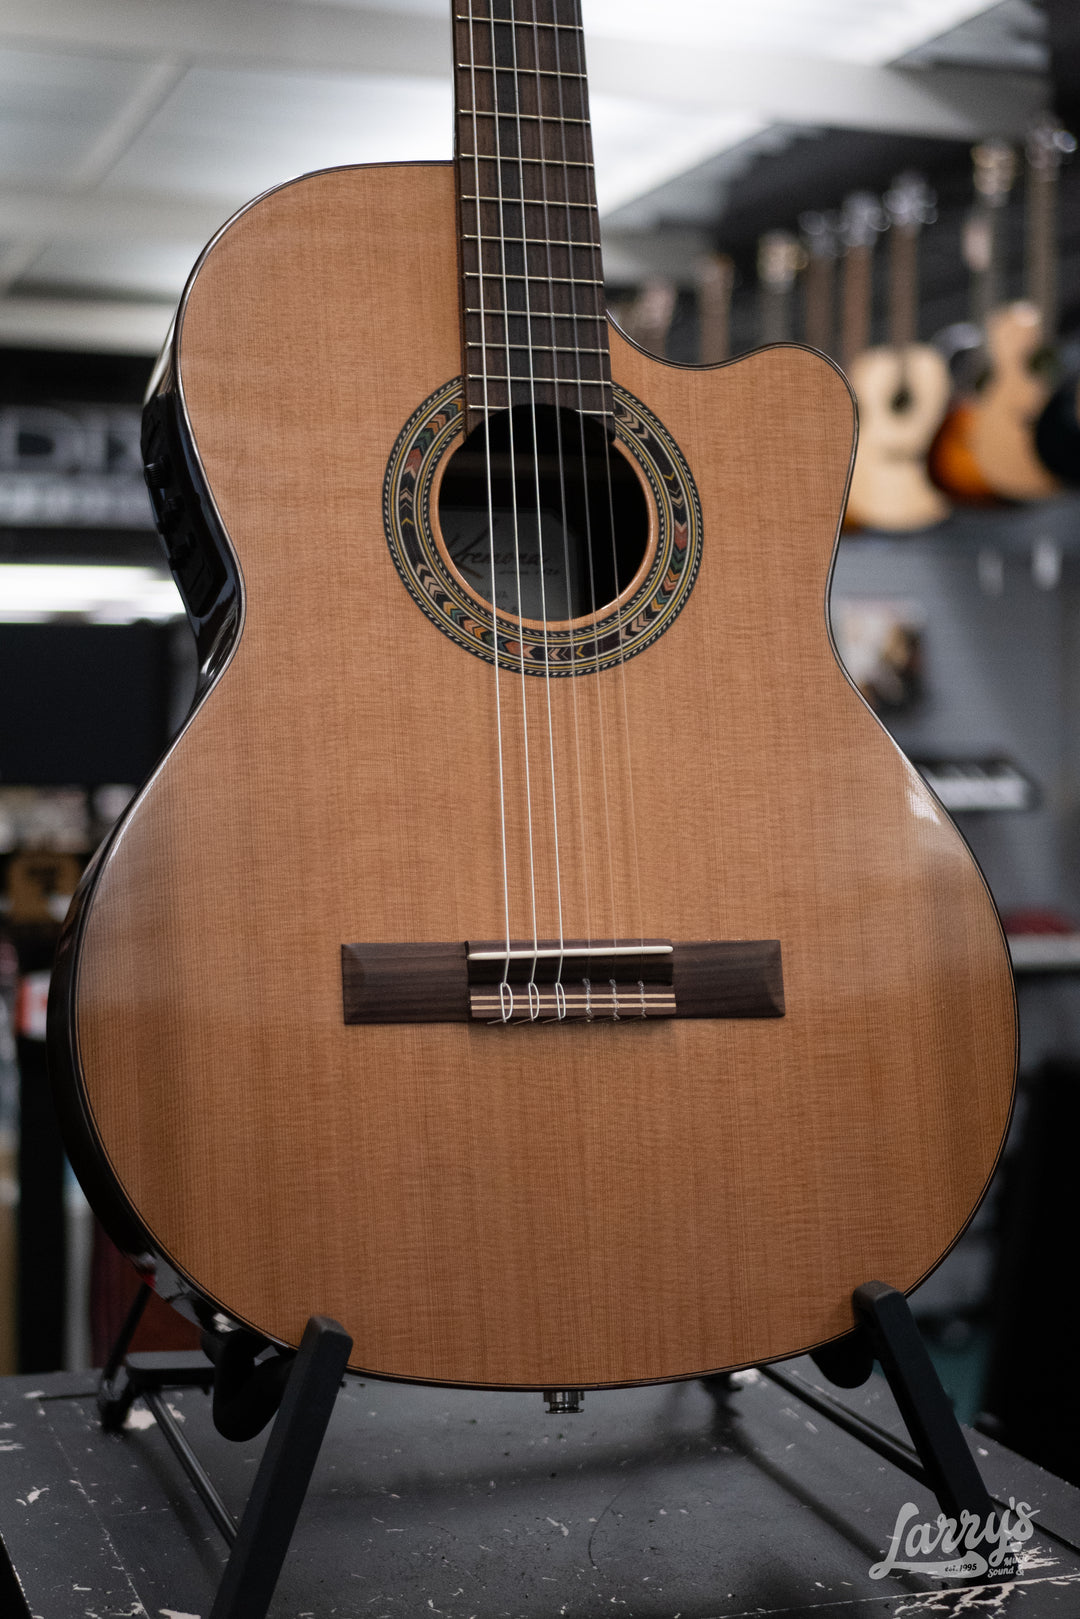 4/4 Caraya Dreadnought Electric-acoustic Guitar,dark Violin  Sunburst.f650dvsceq Swift Delivery With DHL, Your Package in 3-5 Business  Days -  Hong Kong